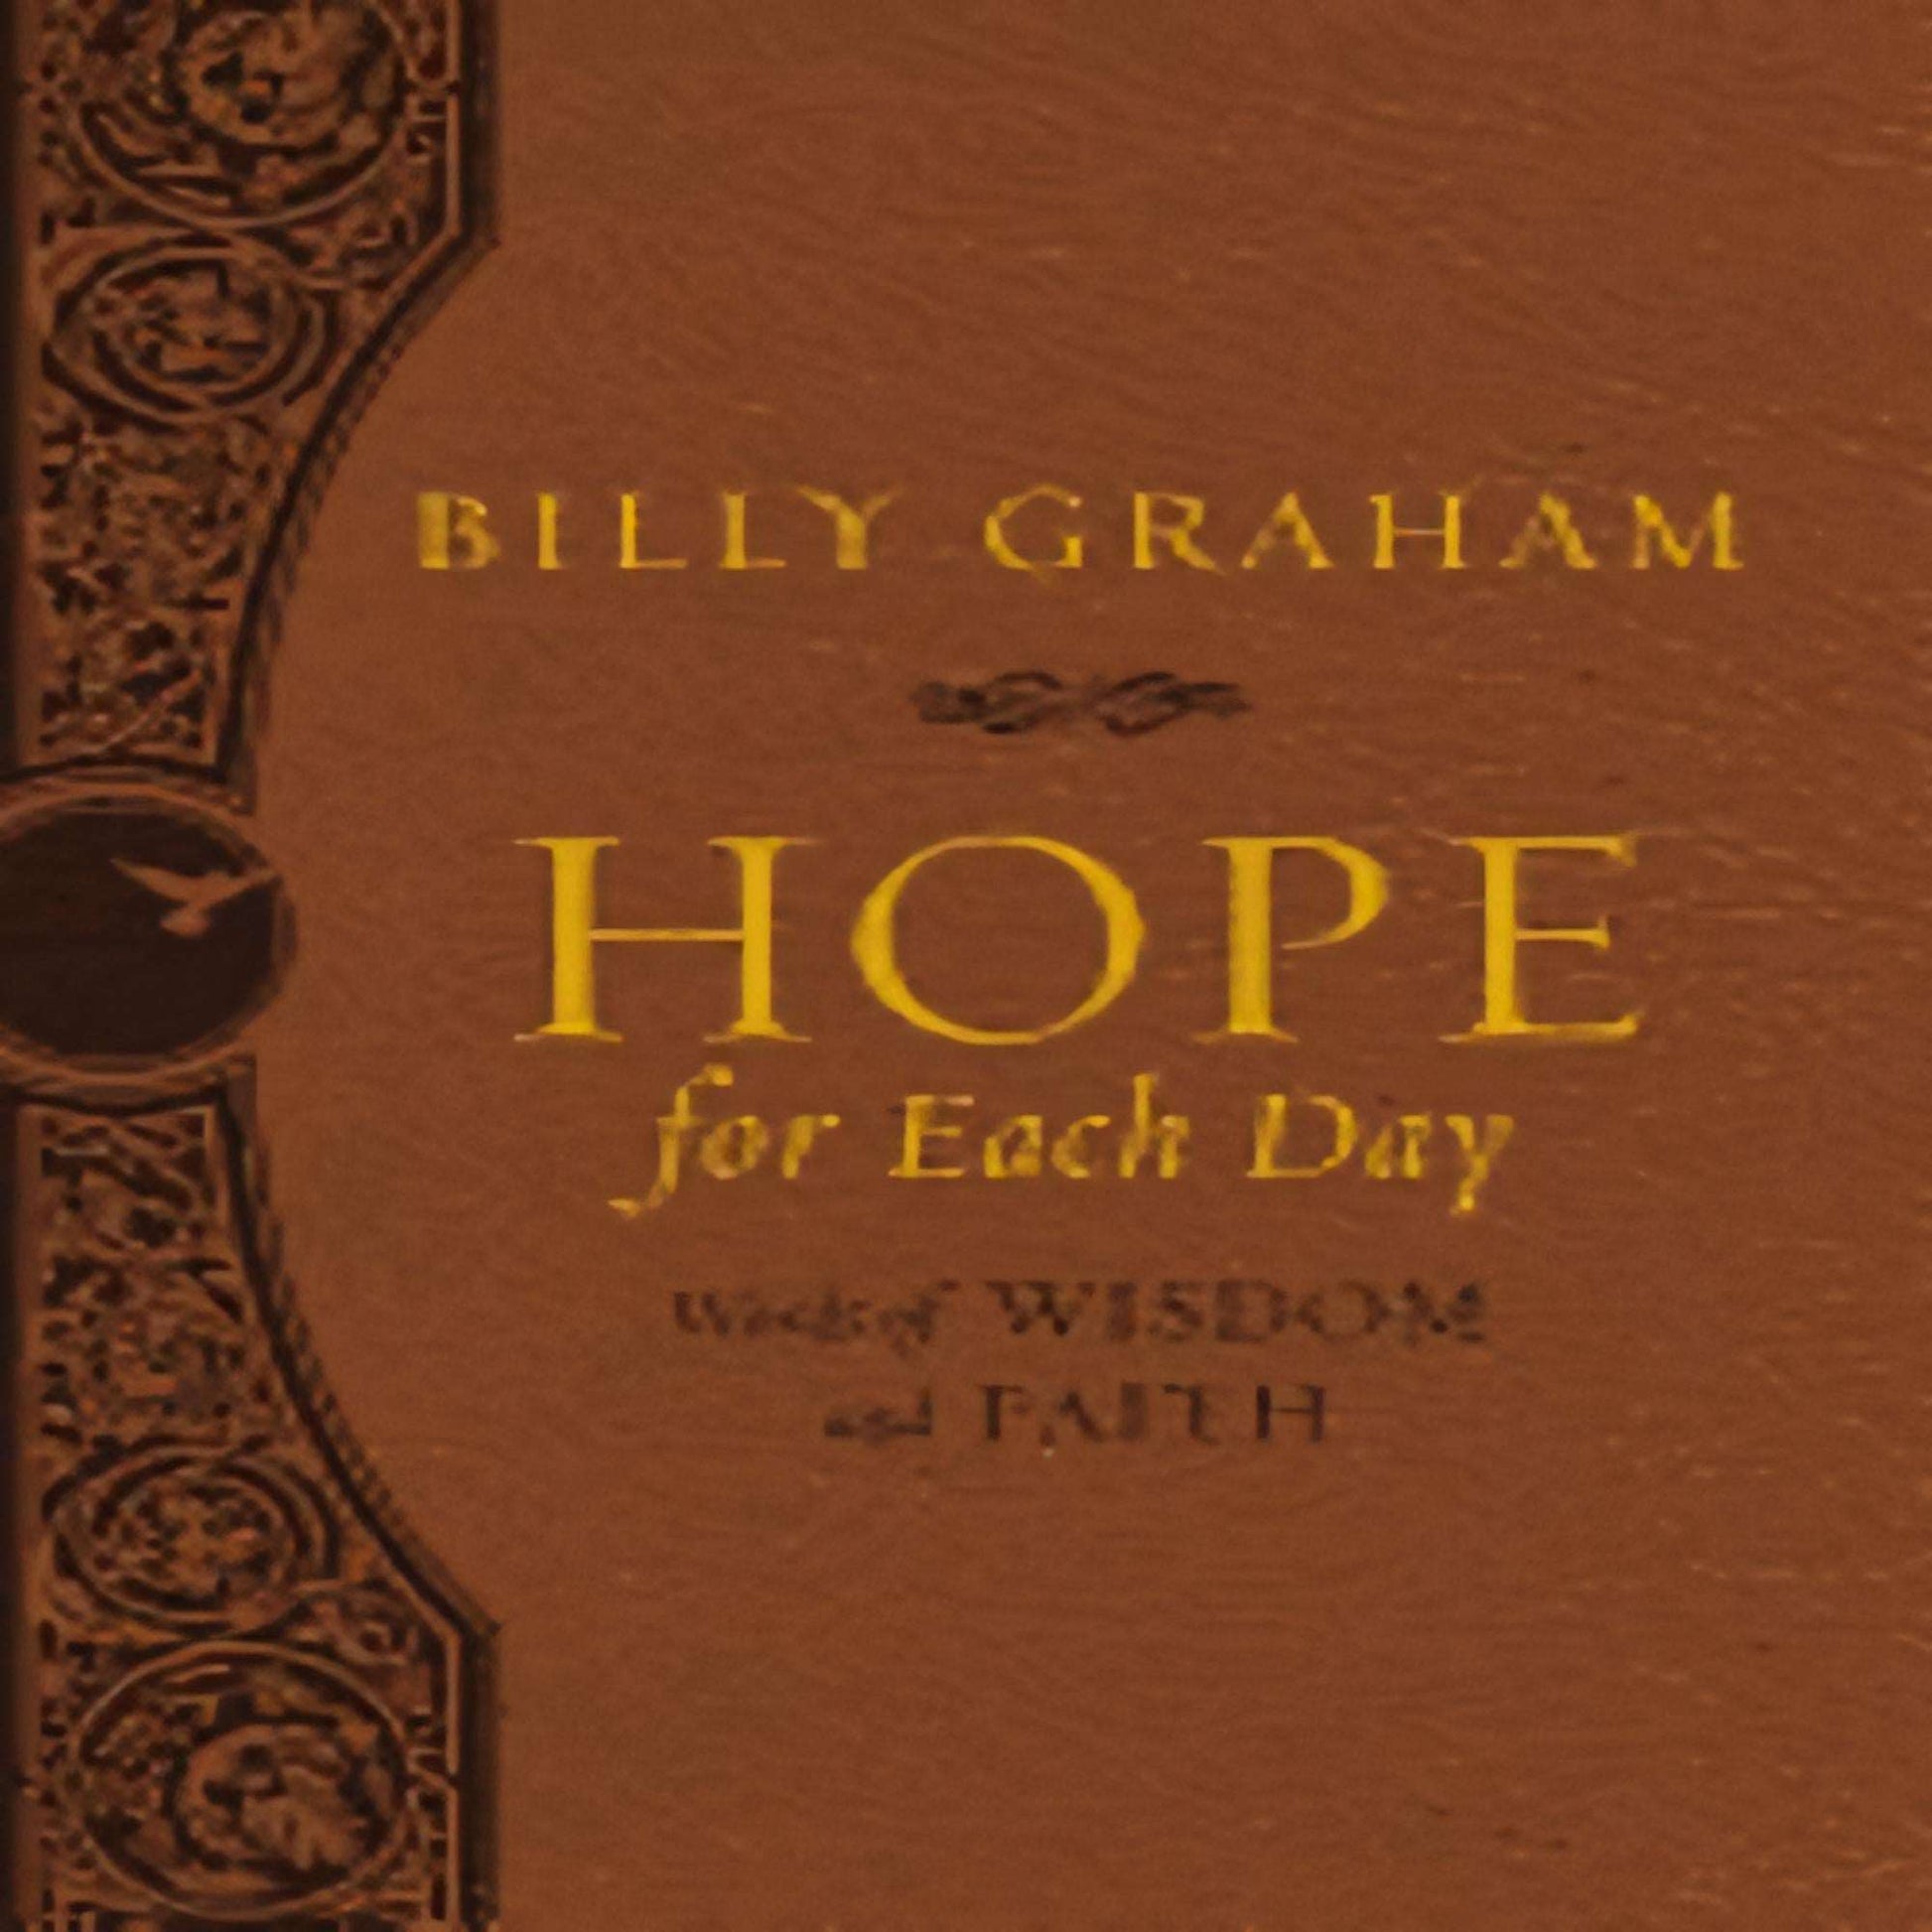 Hope for Each Day: Words of Wisdom and Faith (Deluxe)81-021523- 0718075129DPGBOOKSTORE.COM. Today's Bestsellers.